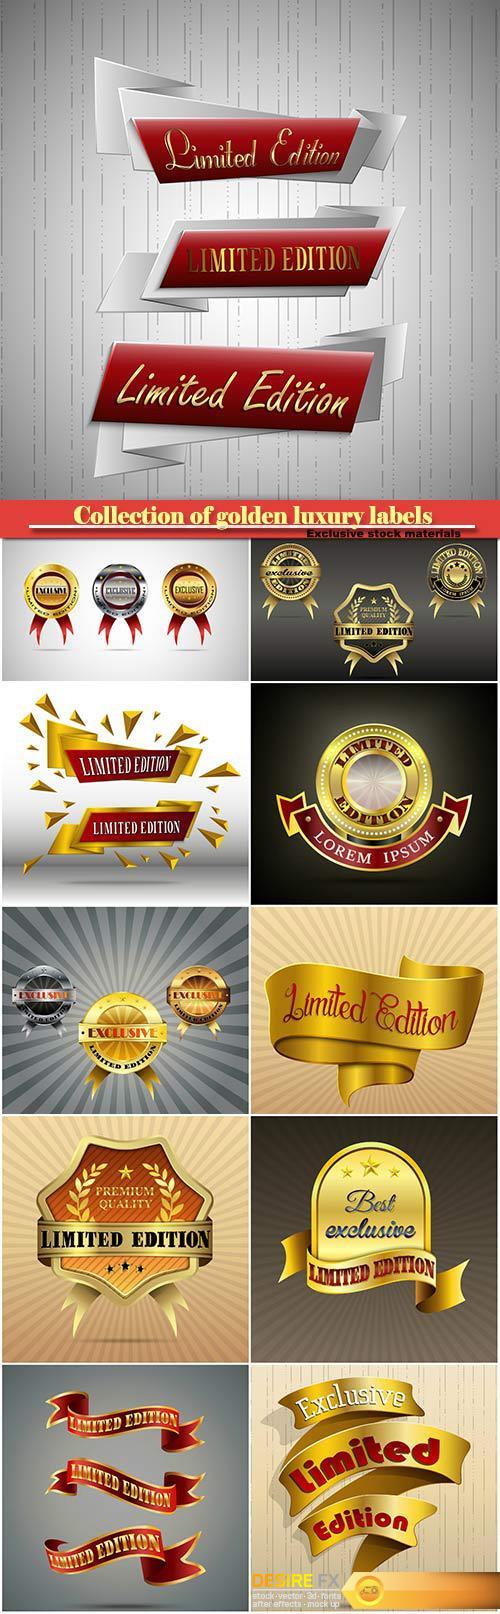 Collection of golden luxury labels in vector